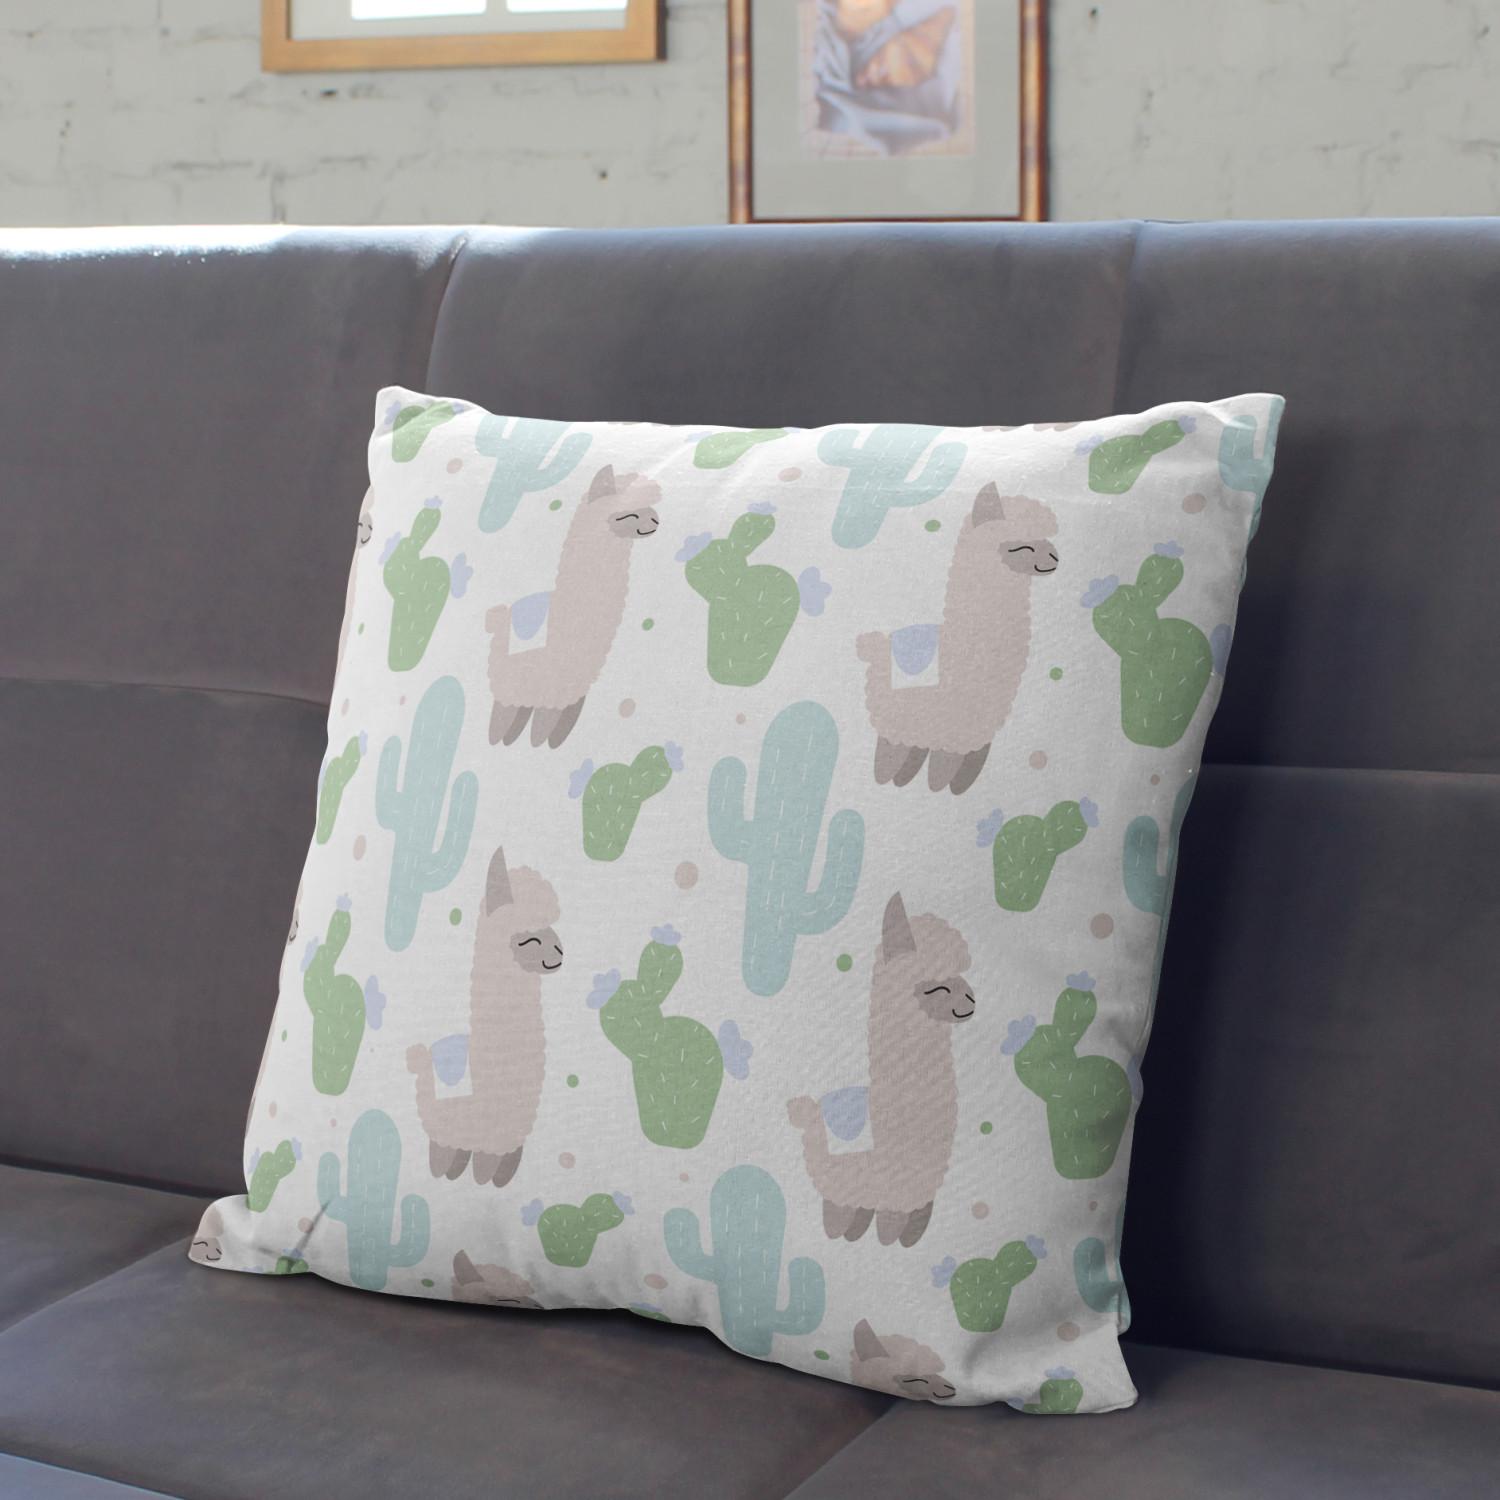 Decorative Microfiber Pillow Frisky llamas - composition with a cactus theme on a white background cushions